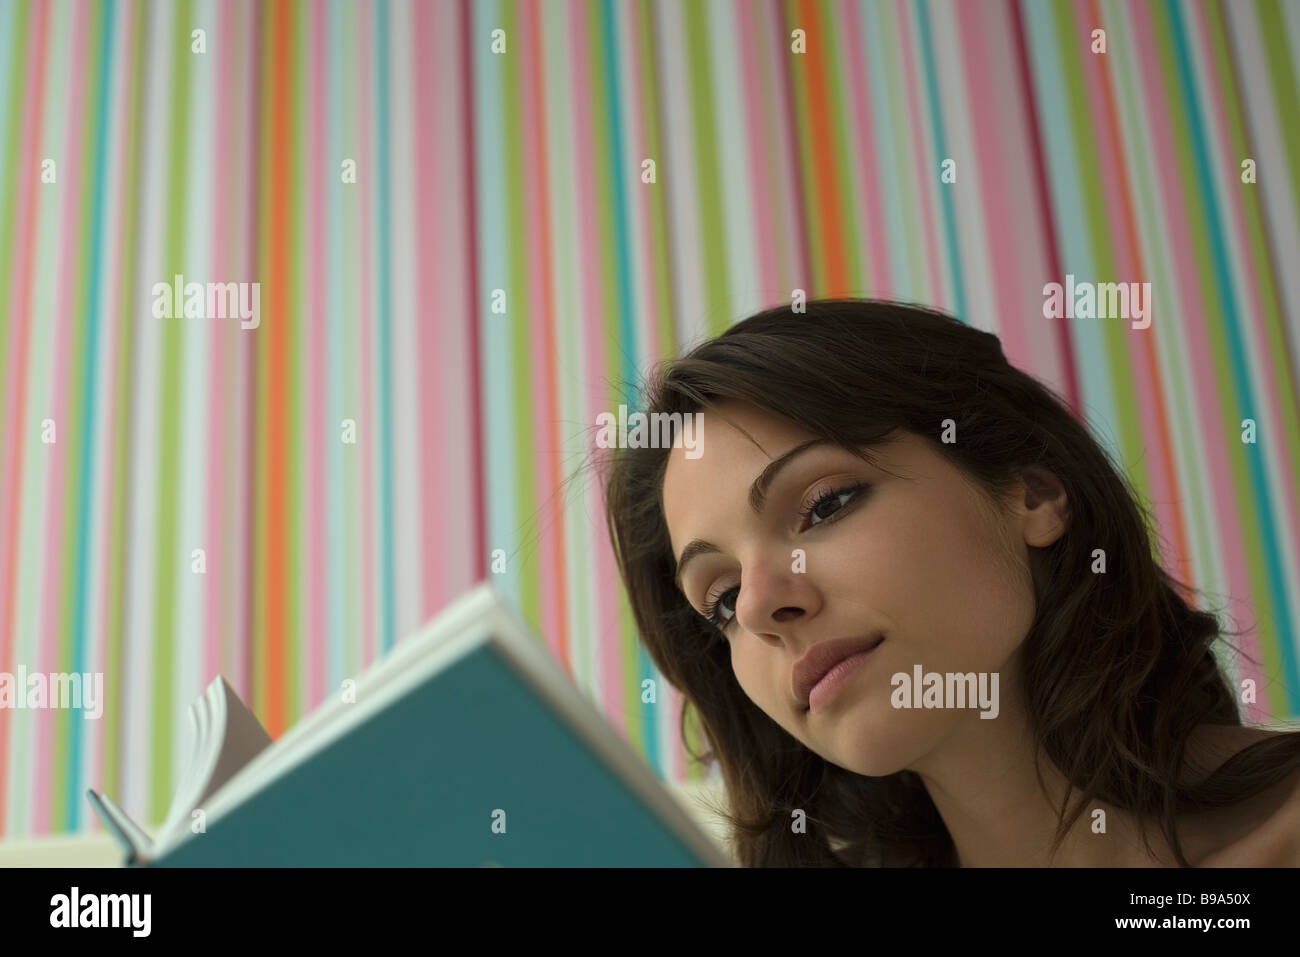 Young woman reading book, low angle view Stock Photo